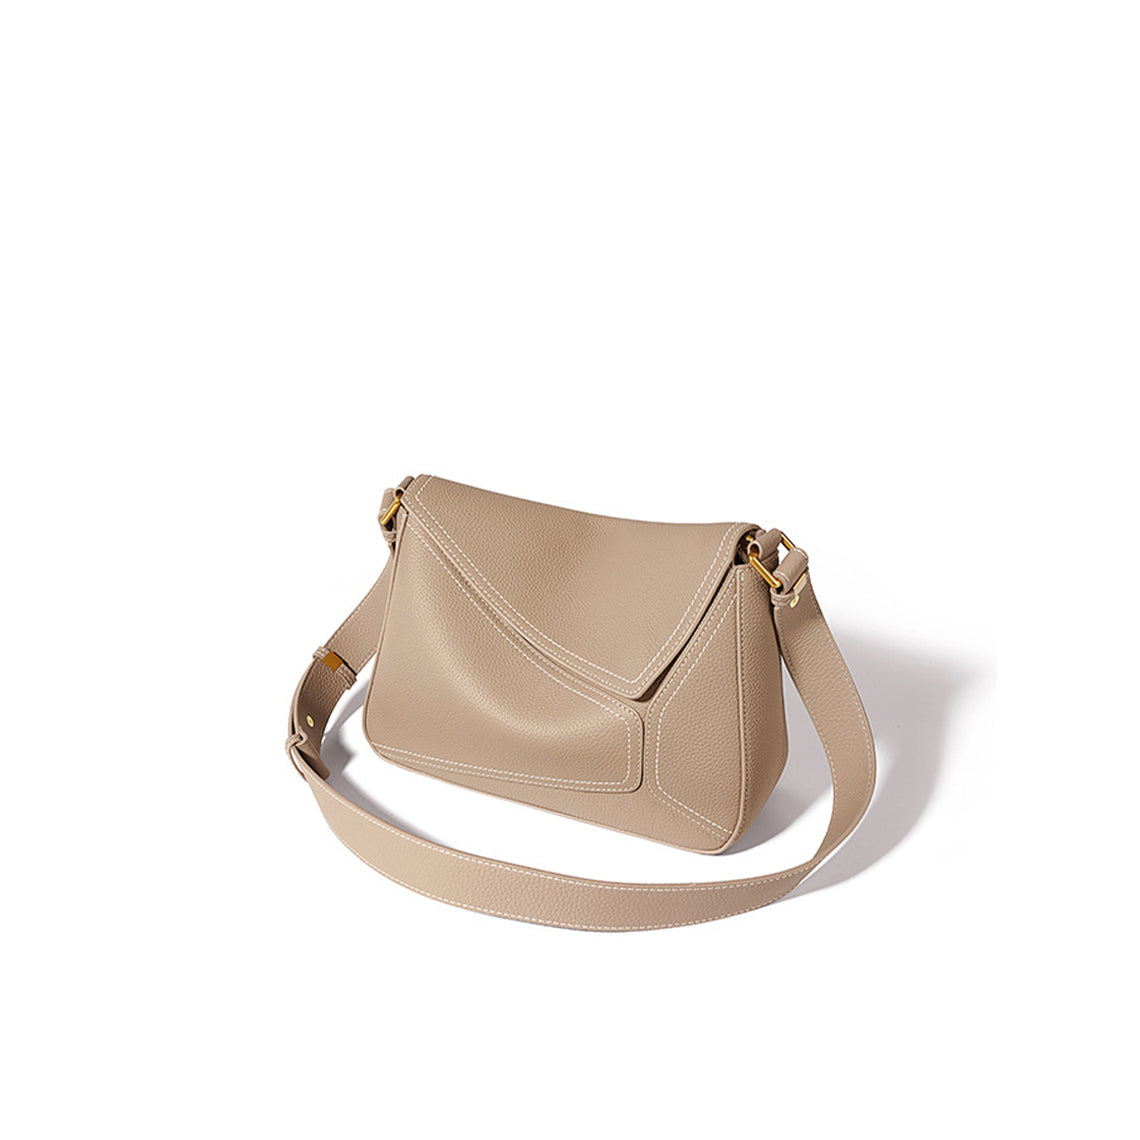 Inspired Puzzle Bag for Women | Genuine Leather Crossbody Bag in Beige - POPSEWING™